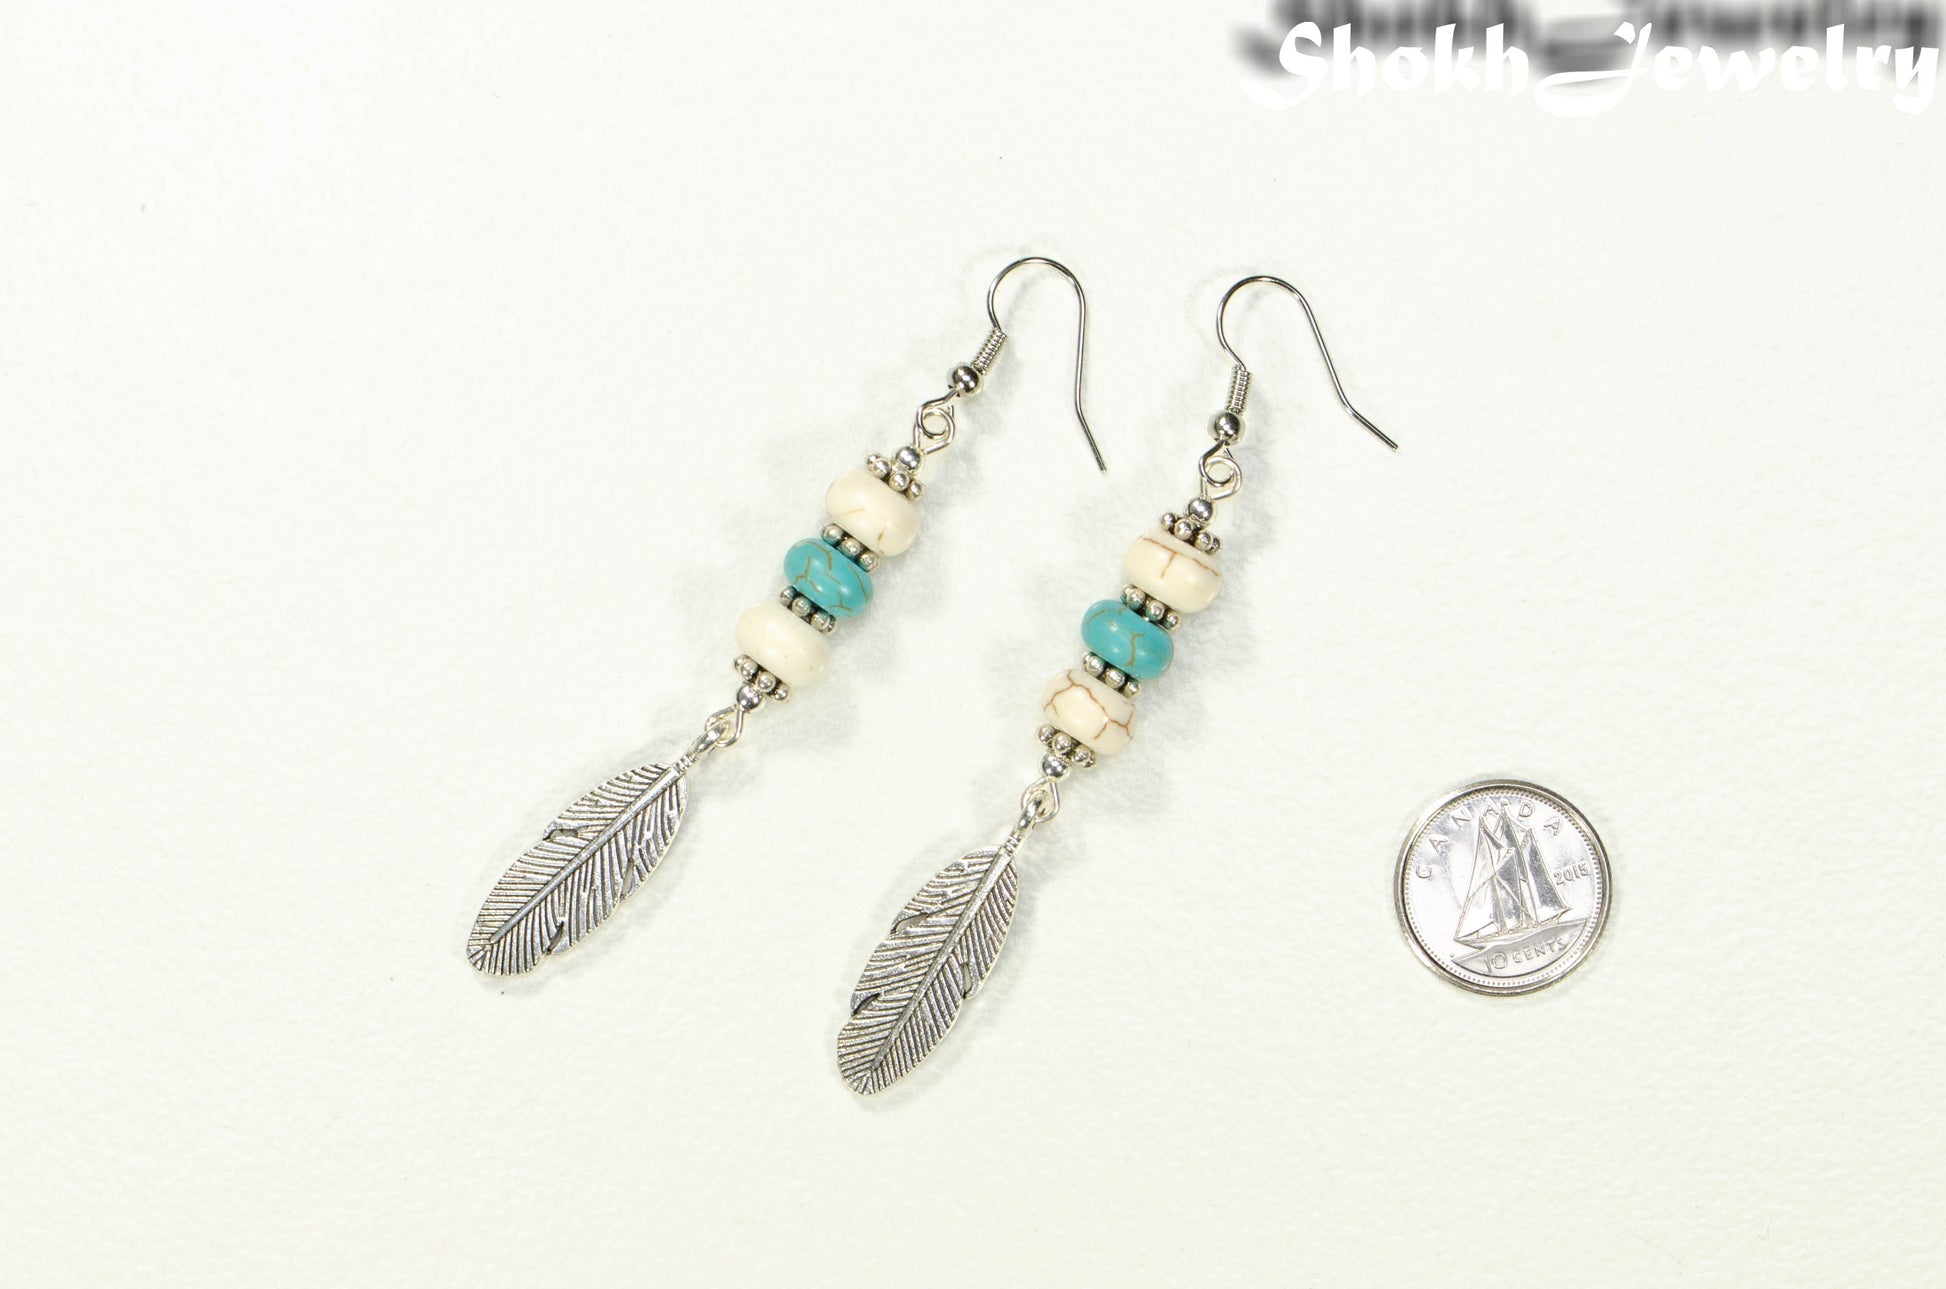 Statement White And Turquoise Howlite And Feather Earrings beside a dime.